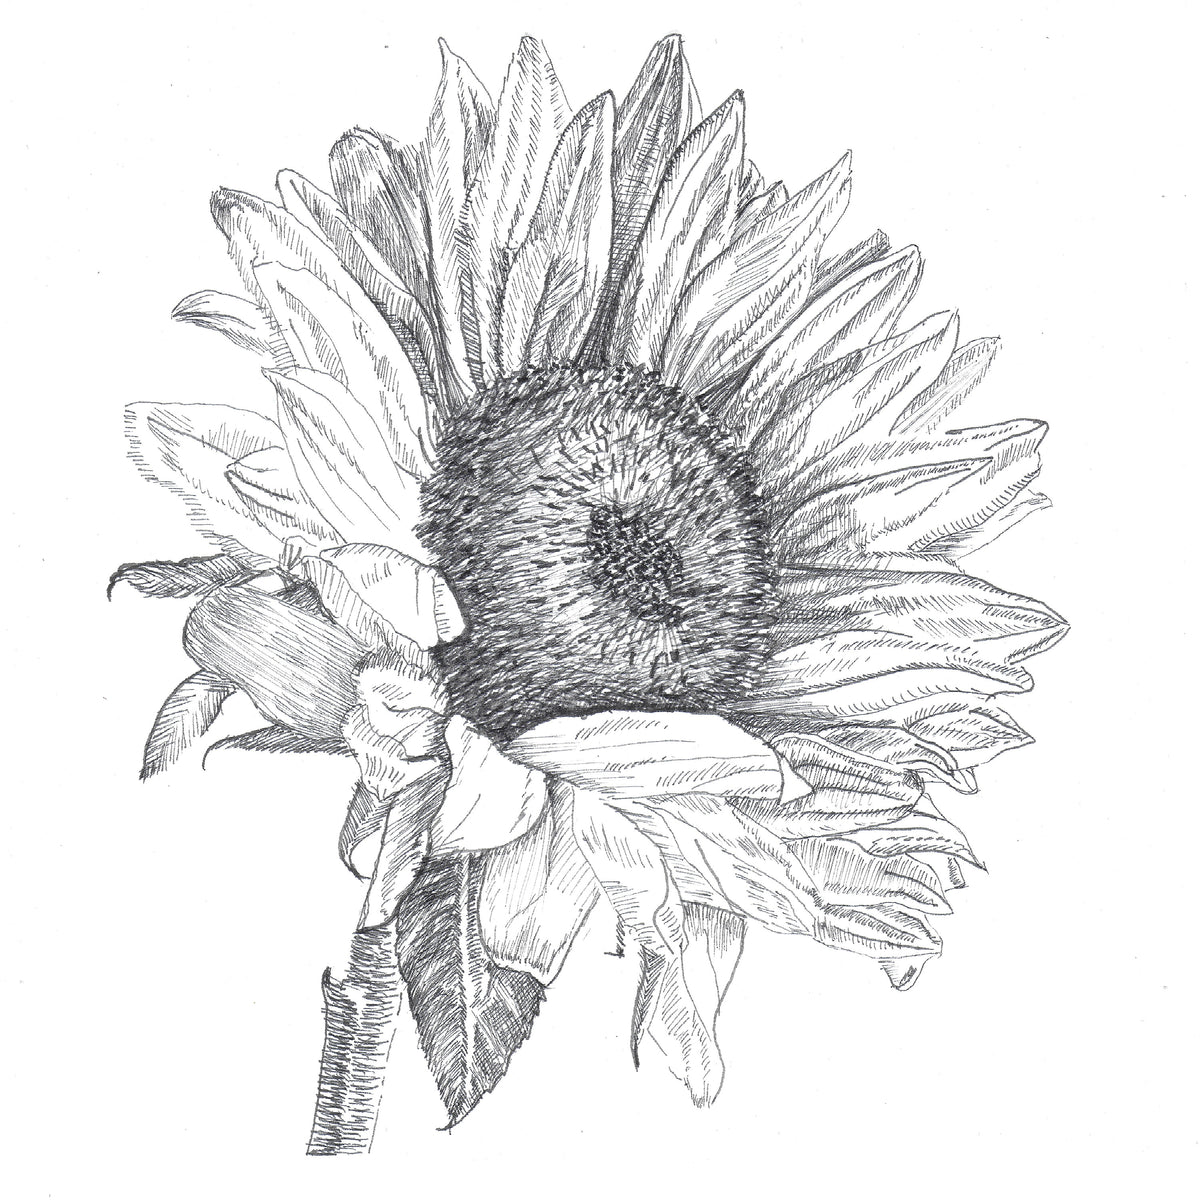 Sunflower Study - Pen and Ink 5&quot; x 5&quot;